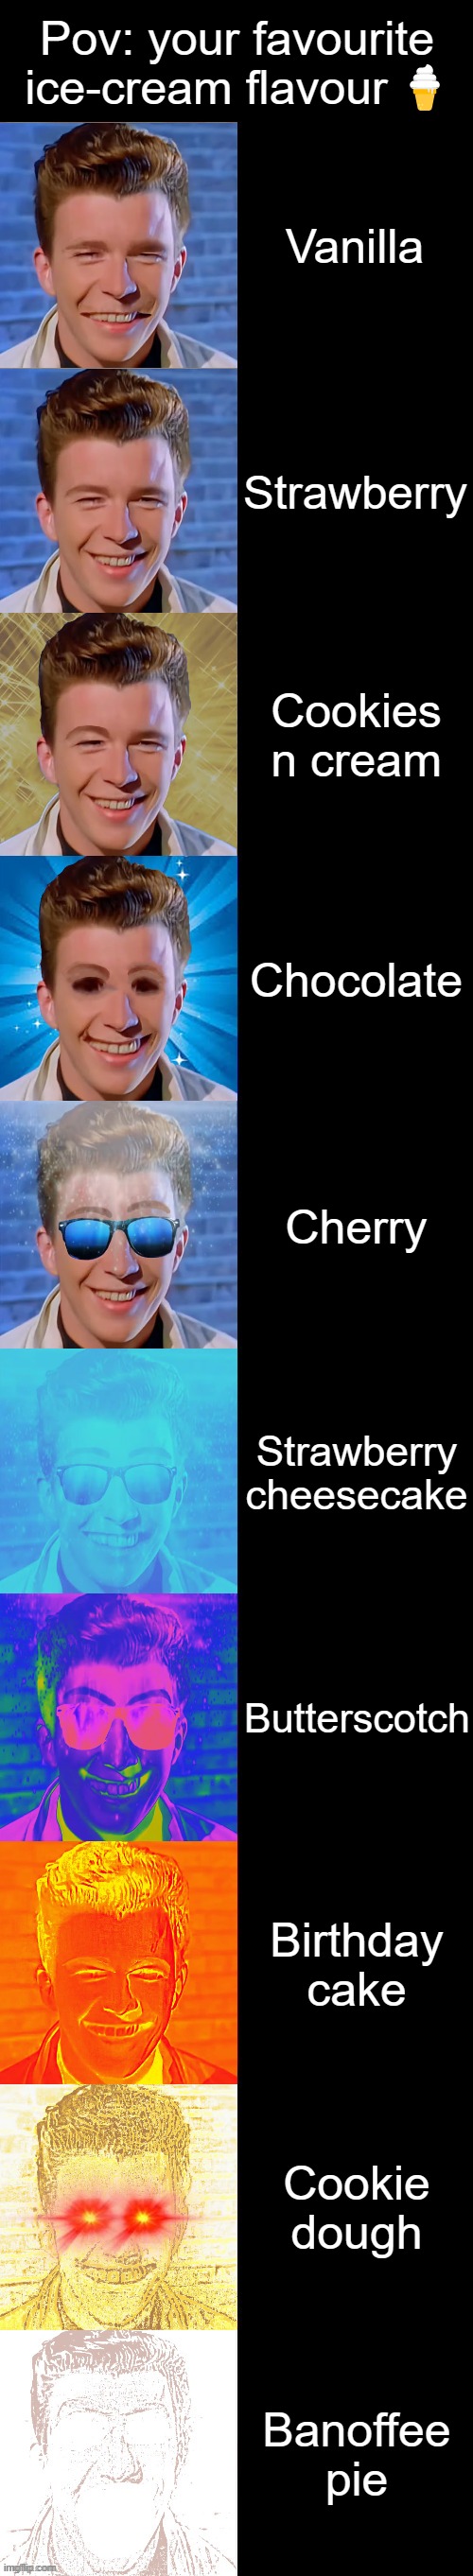 Rick Astley becoming canny: your favourite ice-cream flavour ? | Pov: your favourite ice-cream flavour 🍦; Vanilla; Strawberry; Cookies n cream; Chocolate; Cherry; Strawberry cheesecake; Butterscotch; Birthday cake; Cookie dough; Banoffee pie | image tagged in rick astley becoming canny | made w/ Imgflip meme maker